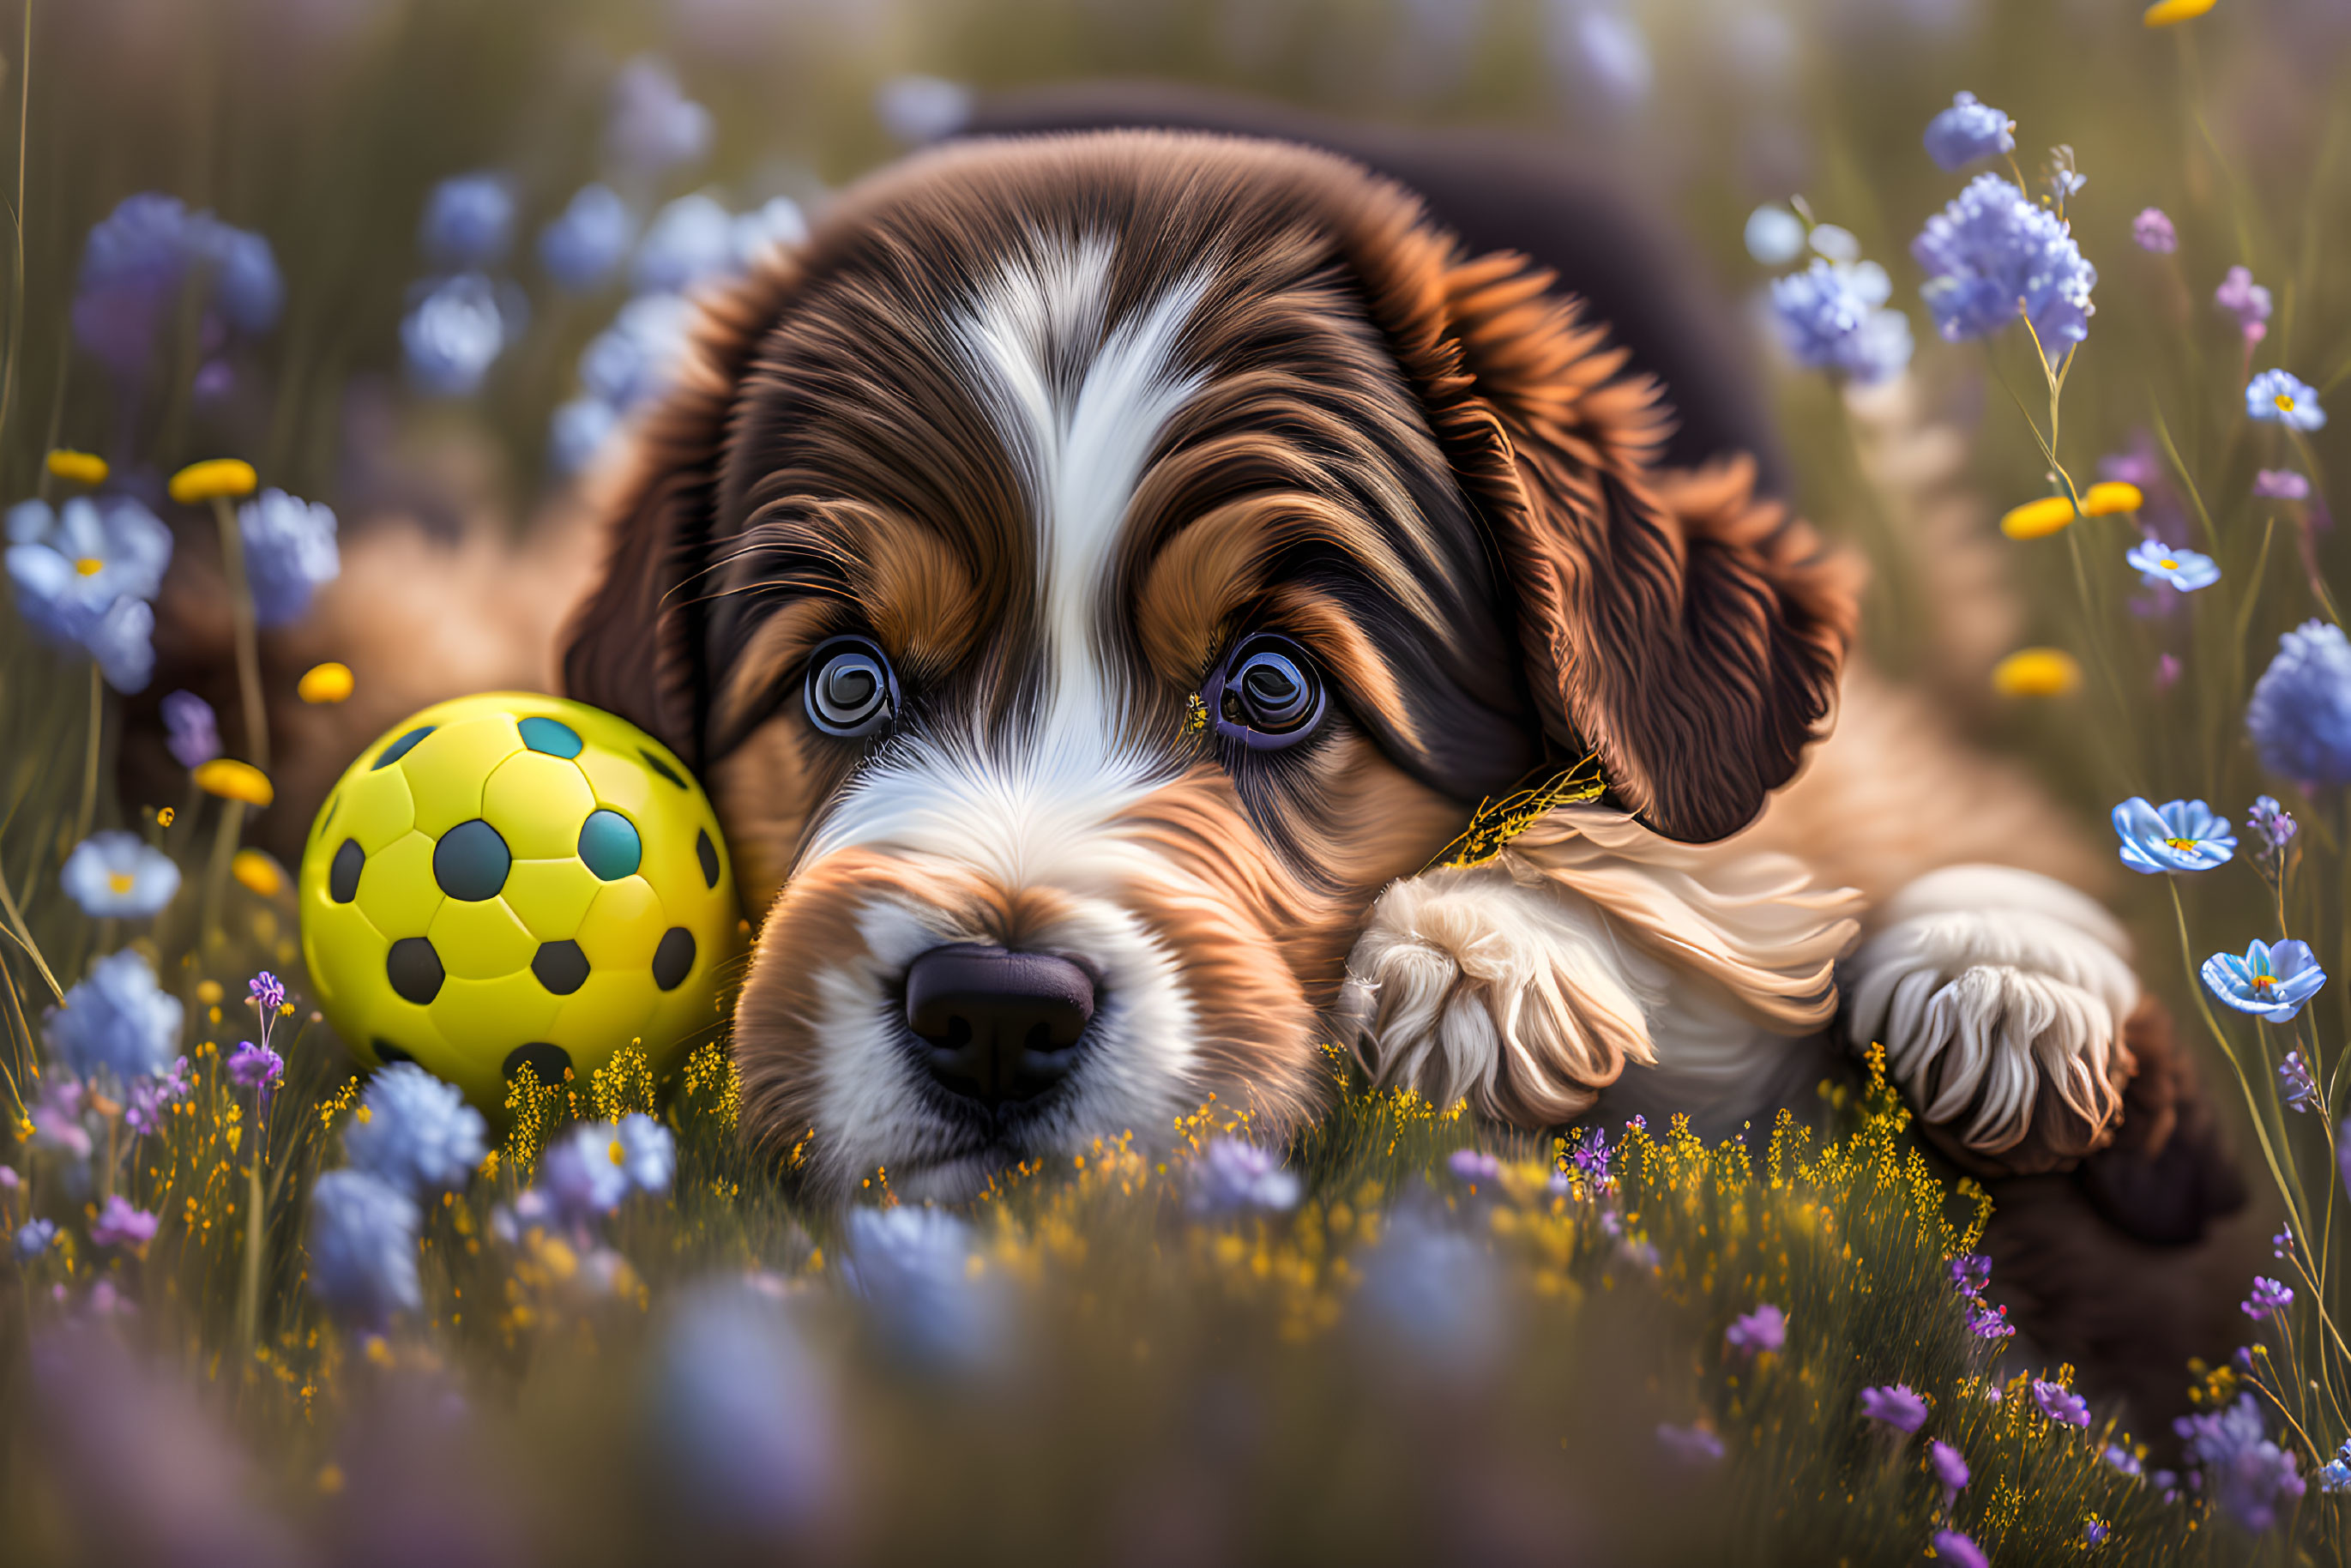 Adorable dog in purple flower field with yellow spotted ball